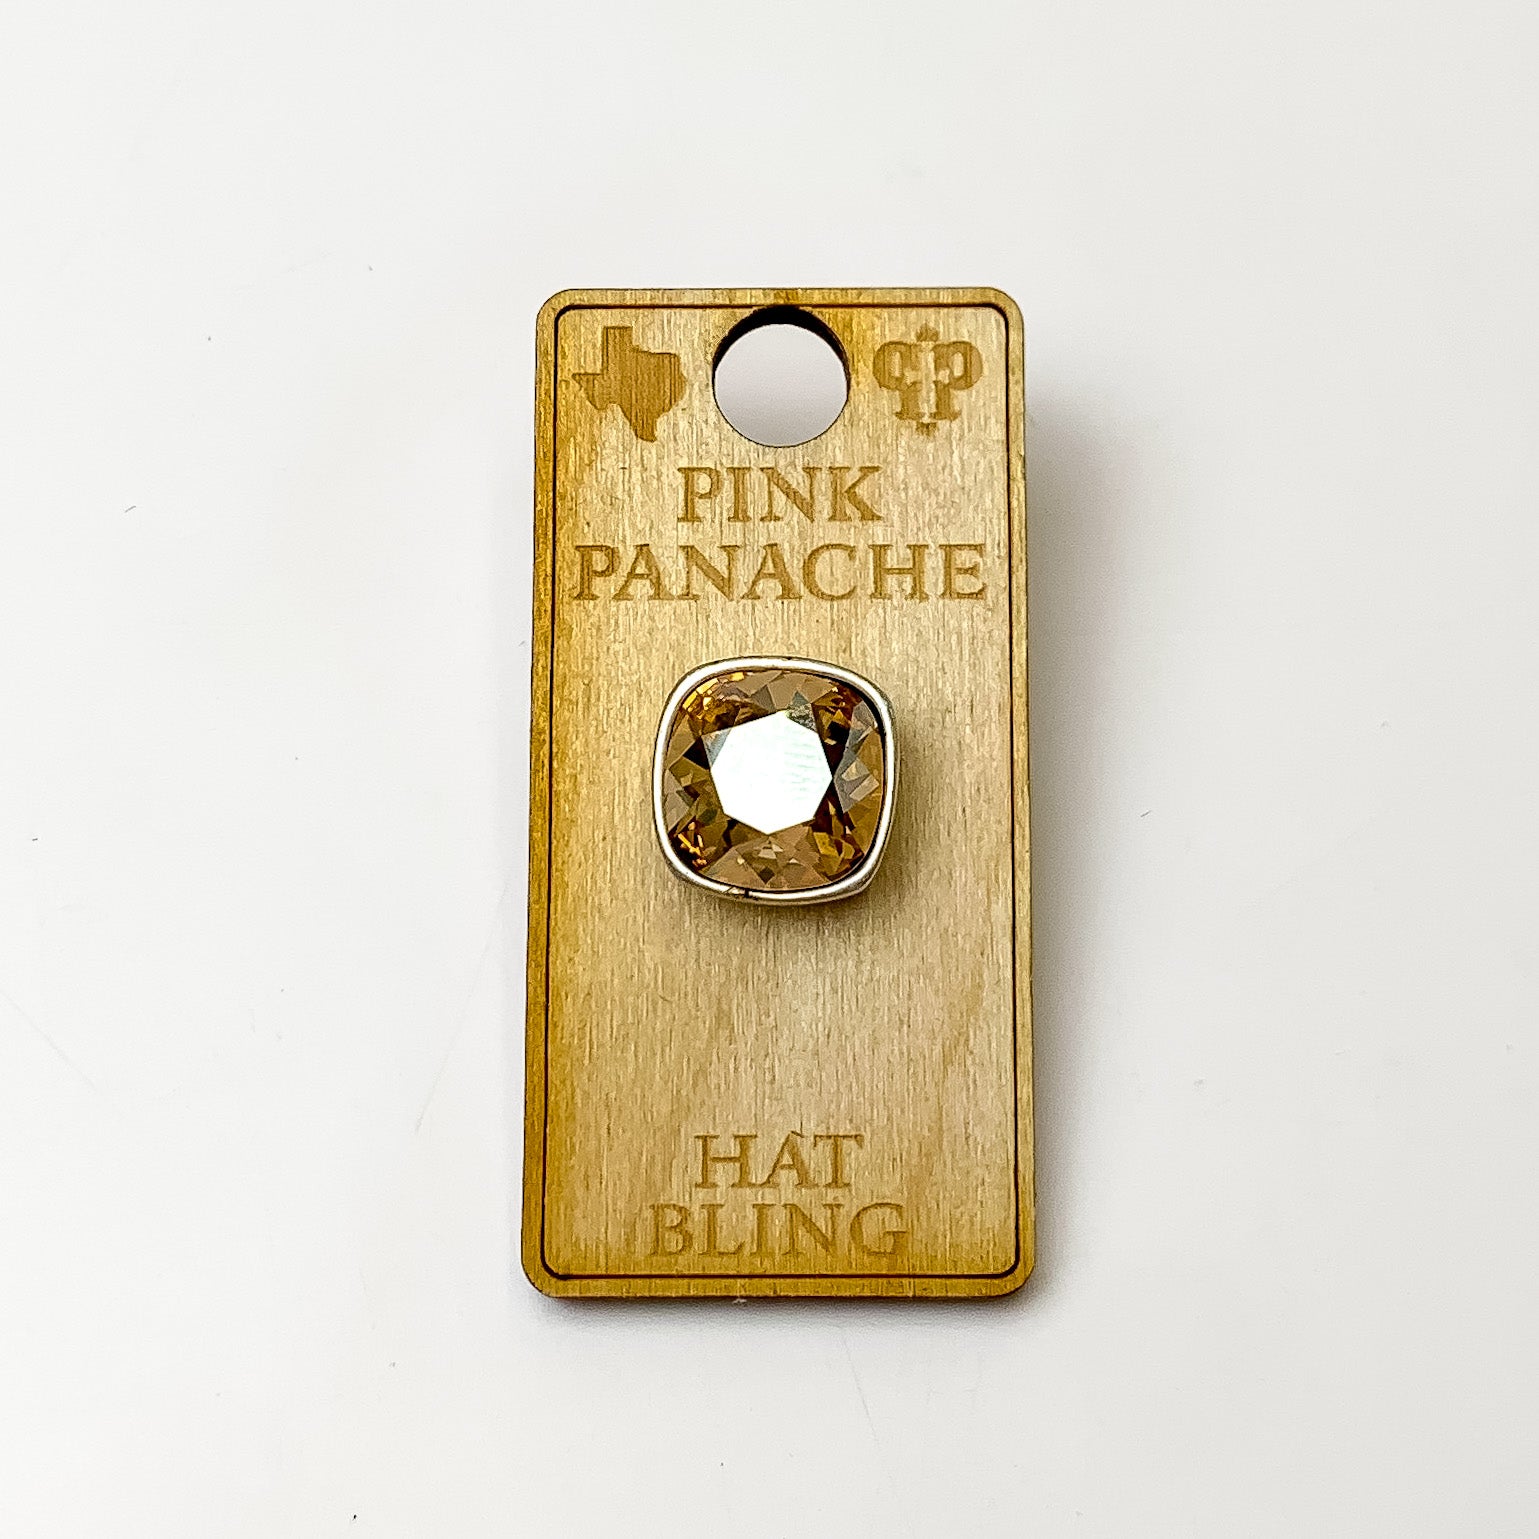 Silver, square hat pin with a golden shadow cushion cut crystal. This hat pin is pictured on a wooden Pink Panache holder on a white background.